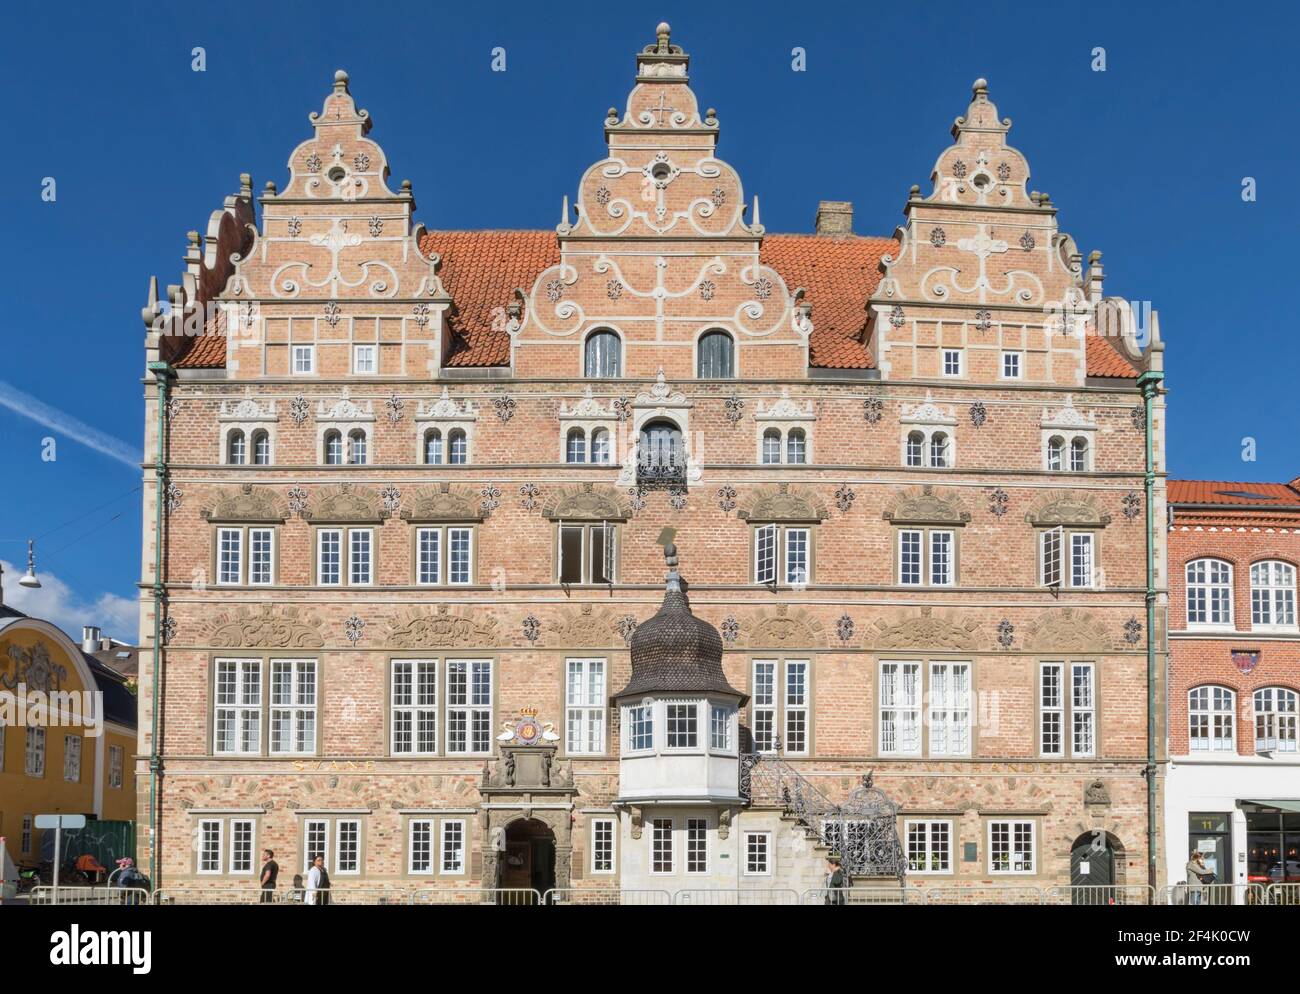 Aalborg, Denmark - September 1, 2020: Jens Bang’s house, a large Renaissance style building  that contained the Swan Pharmacy in 17th century. Stock Photo